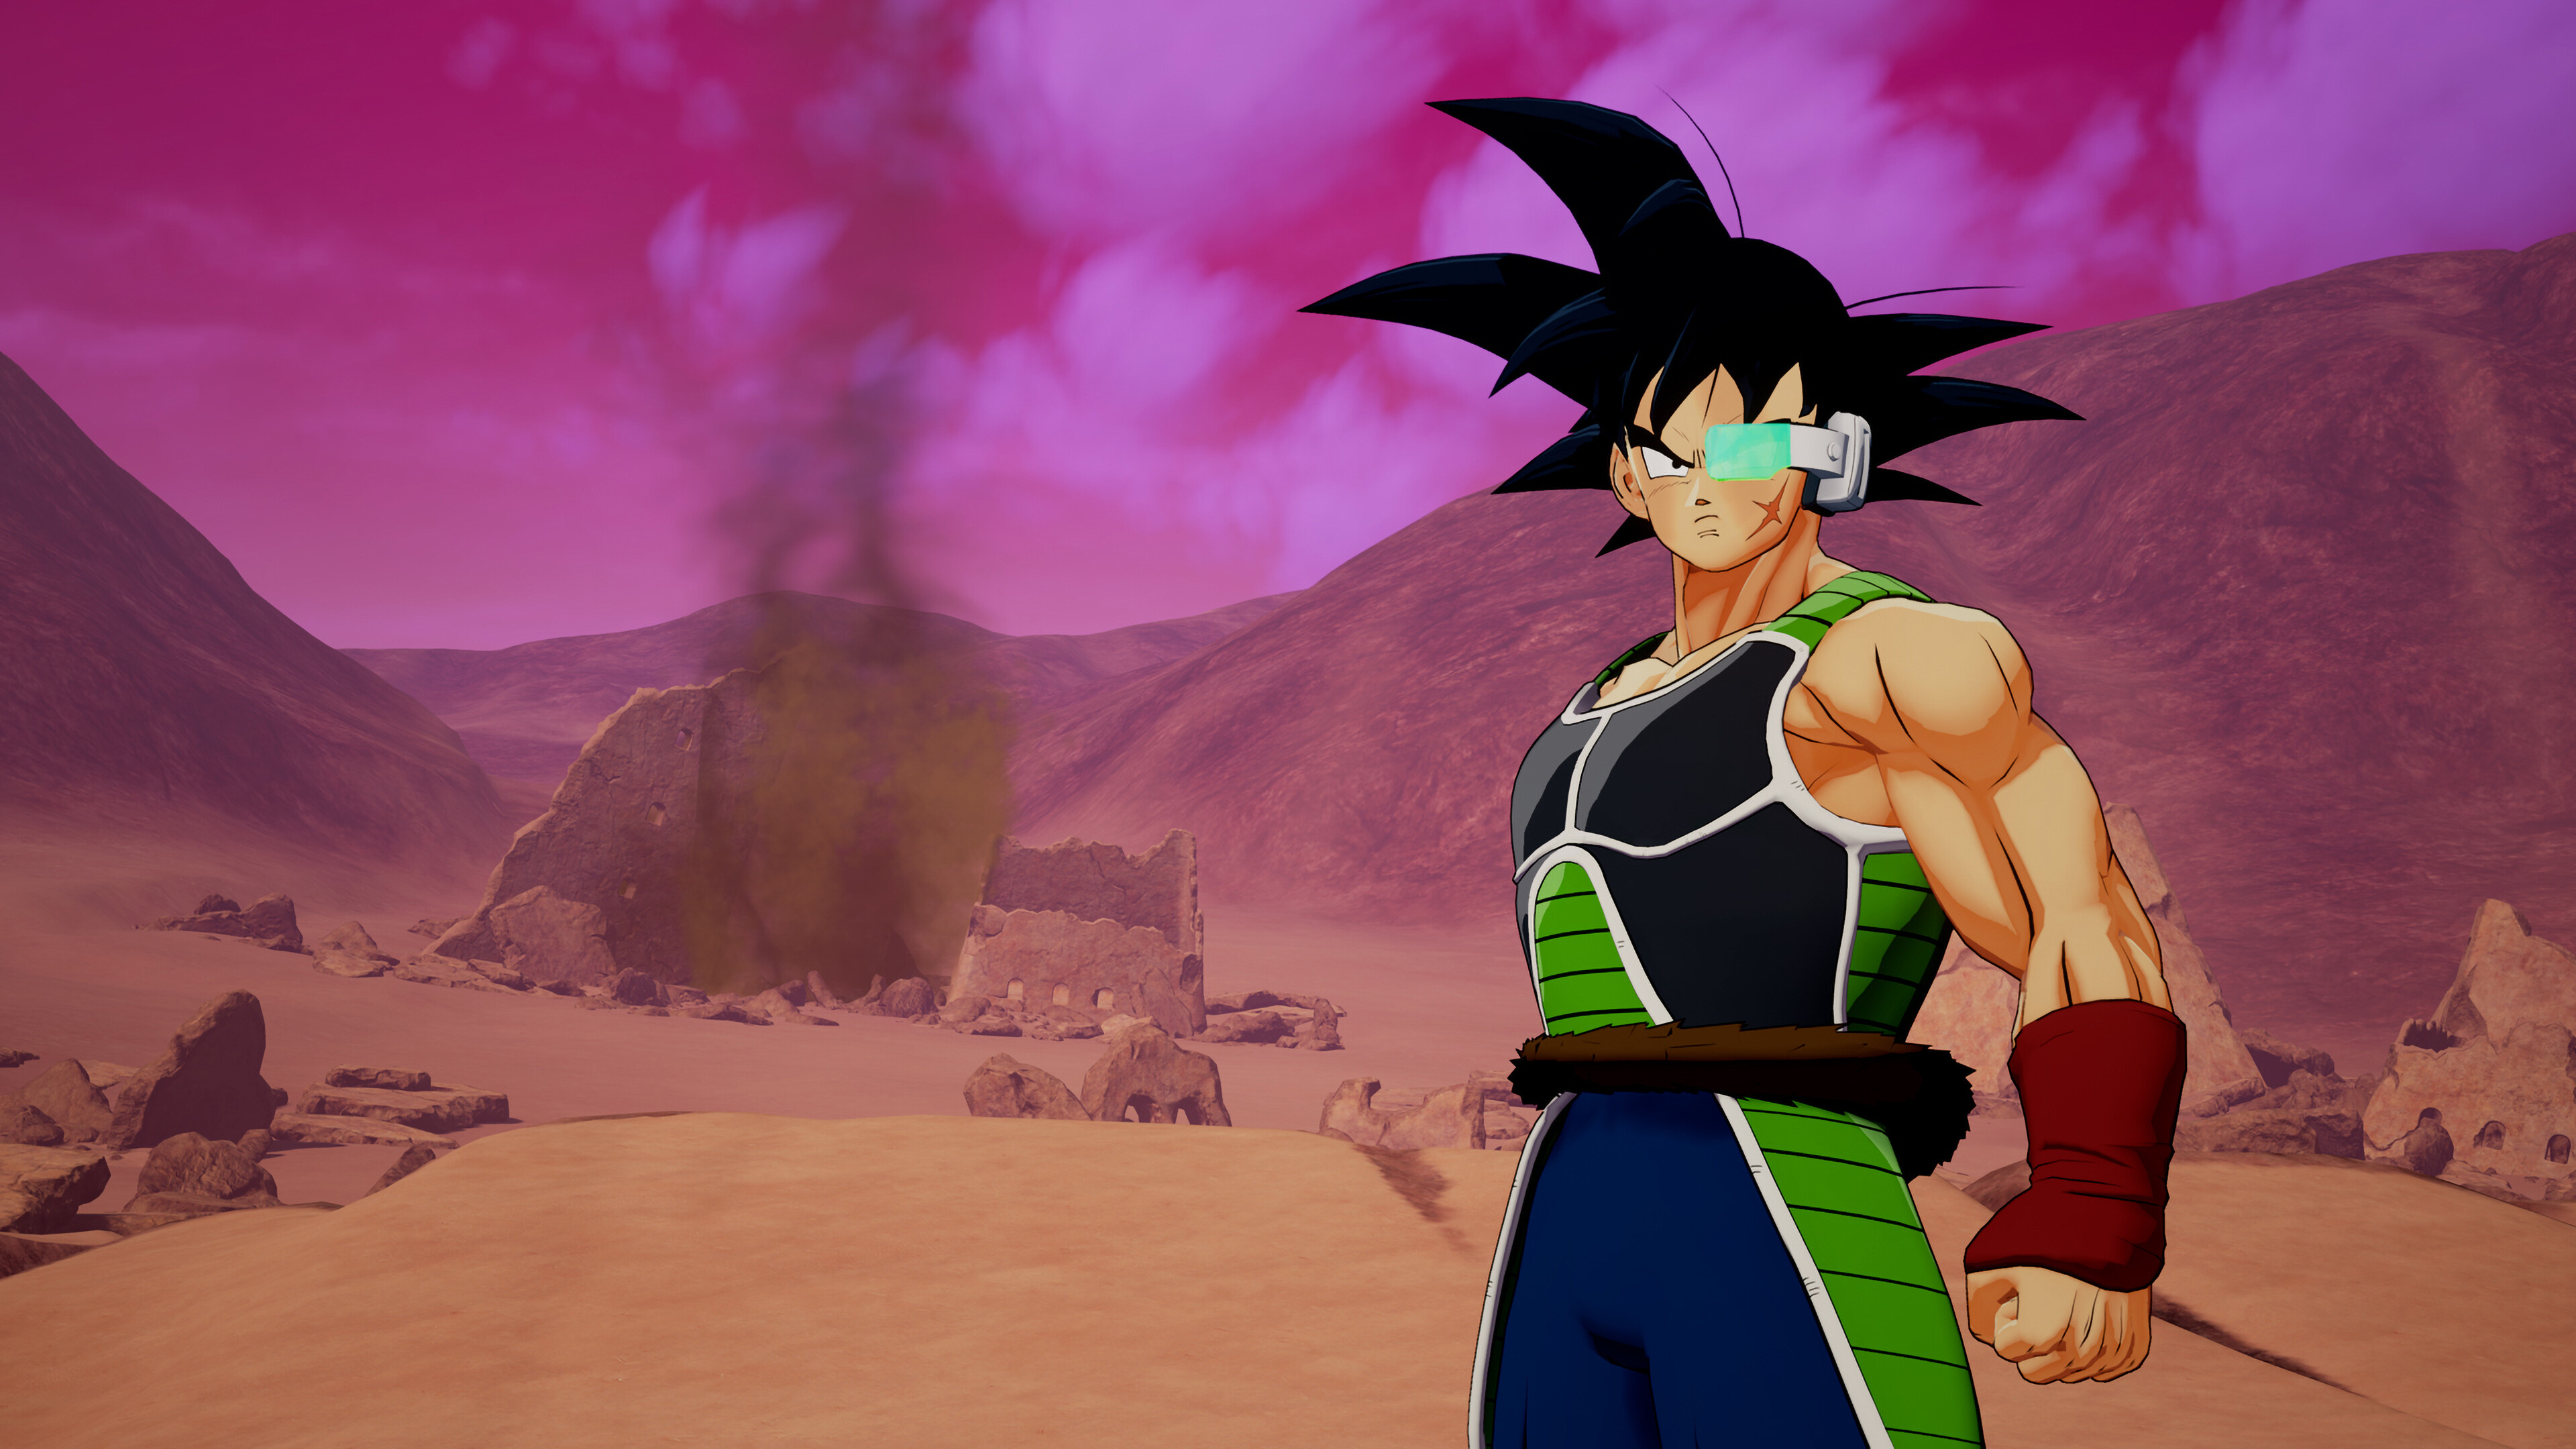 DRAGON BALL Z: KAKAROT - BARDOCK - Alone Against Fate Free Download for PC